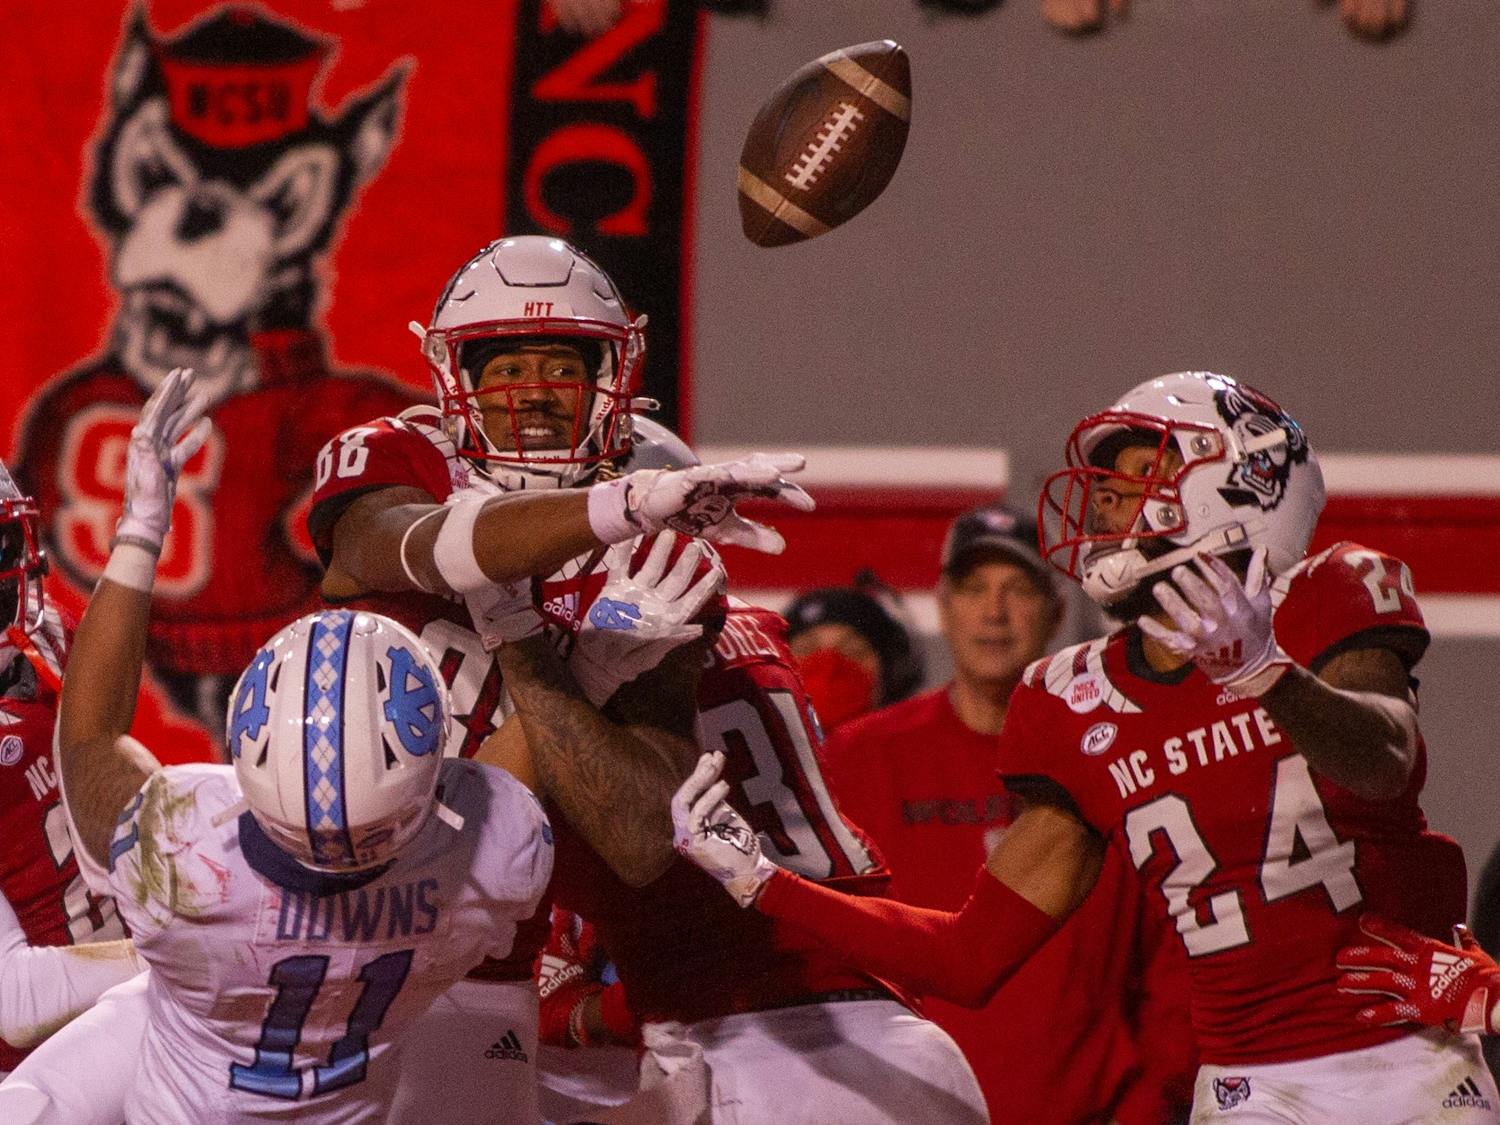 N.C. State graduate center back makes the final catch of football game against the UNC at Carter Finley Stadium in Raleigh, NC, on Friday, Nov. 26, 2021. This catch marked the final posession of the game, securing N.C. State's 34-30 victory.